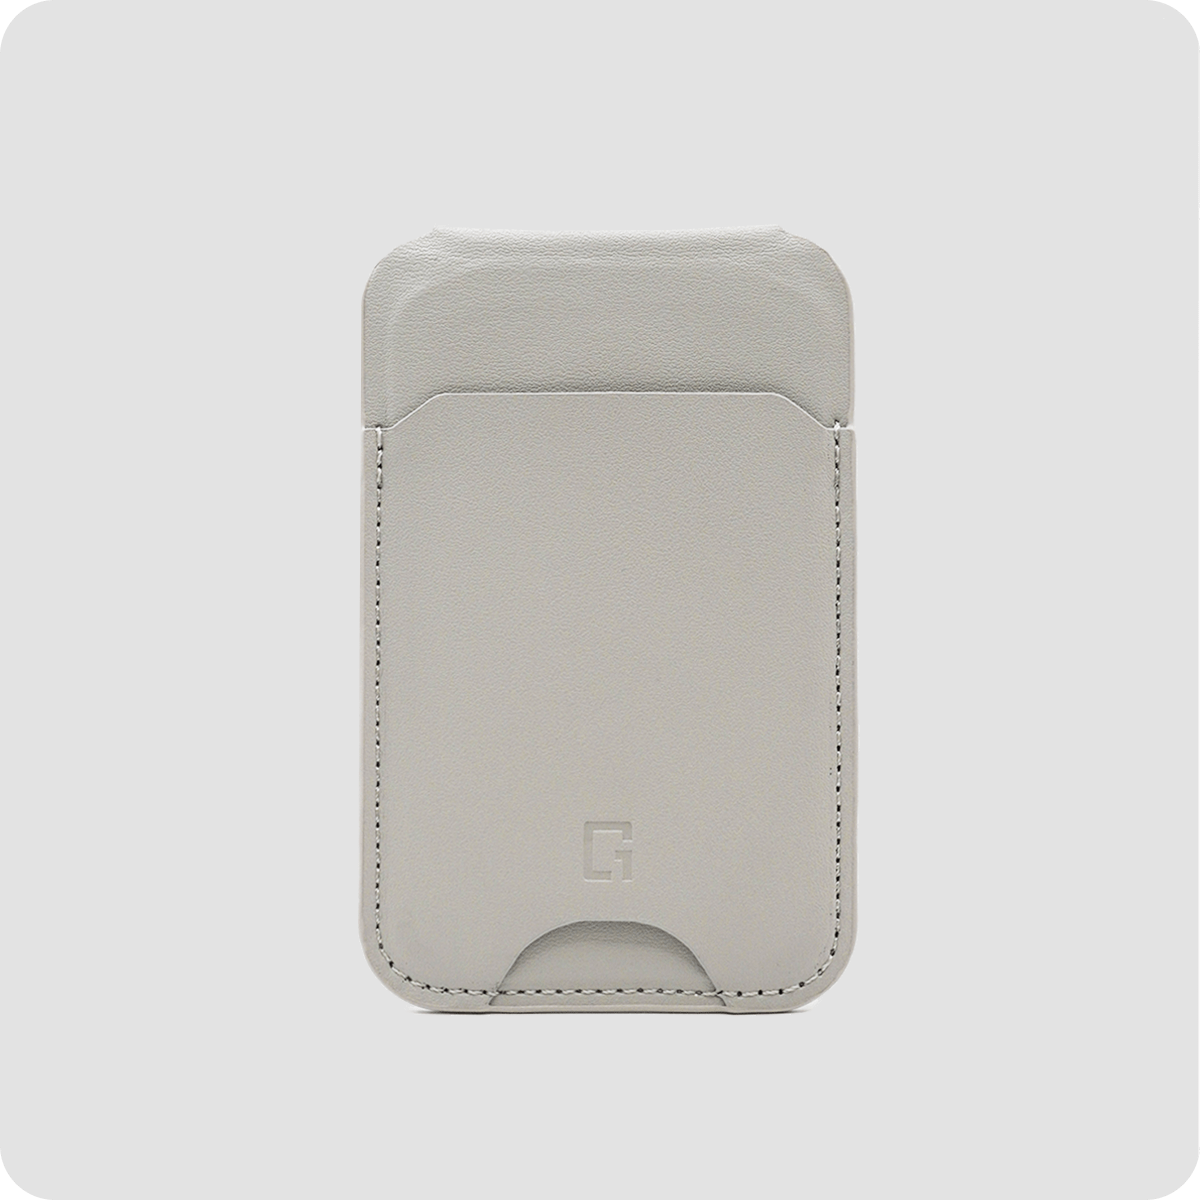 One Good Card: Smart Digital Name Card (Duo-Flip Card Holder (Magsafe)) - Personalised Near Field Communication (NFC) Digital Business Cards designs.